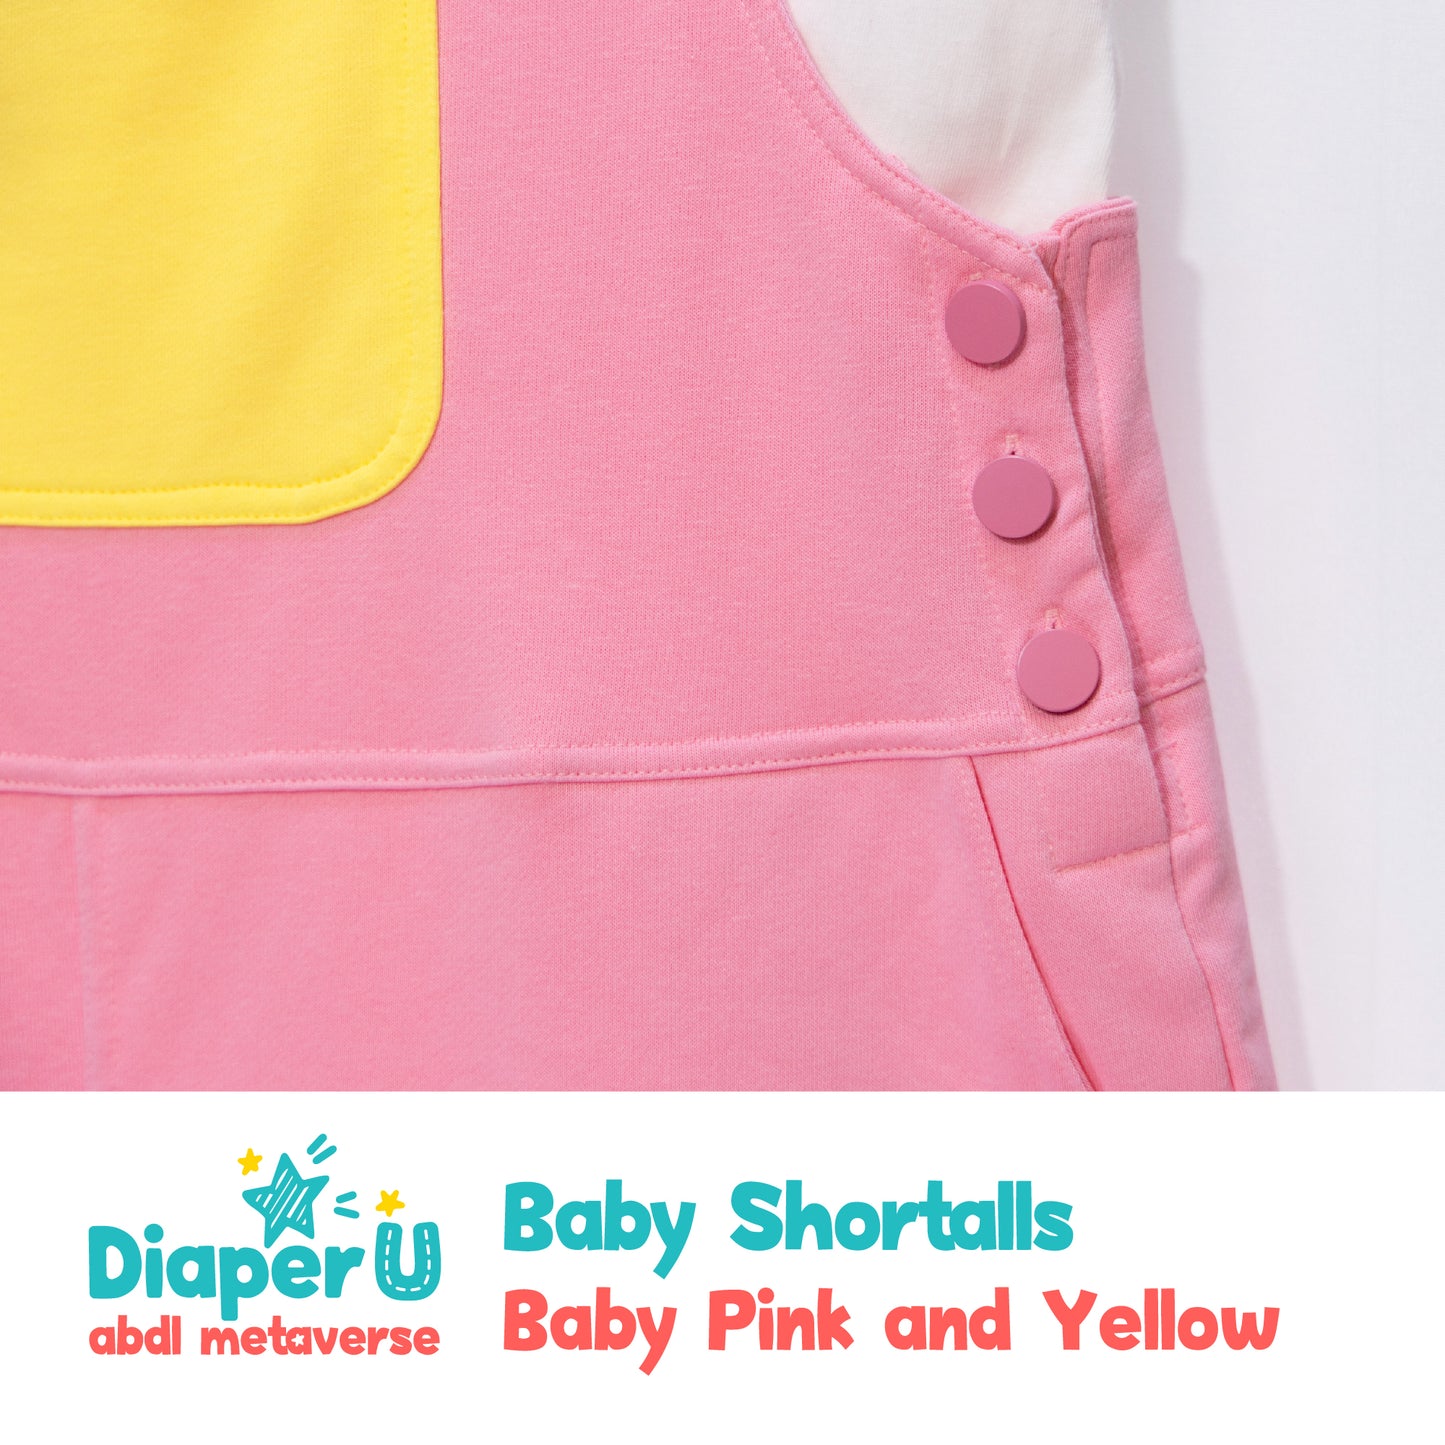 Baby Shortalls - Baby Pink and Yellow (Unisex)